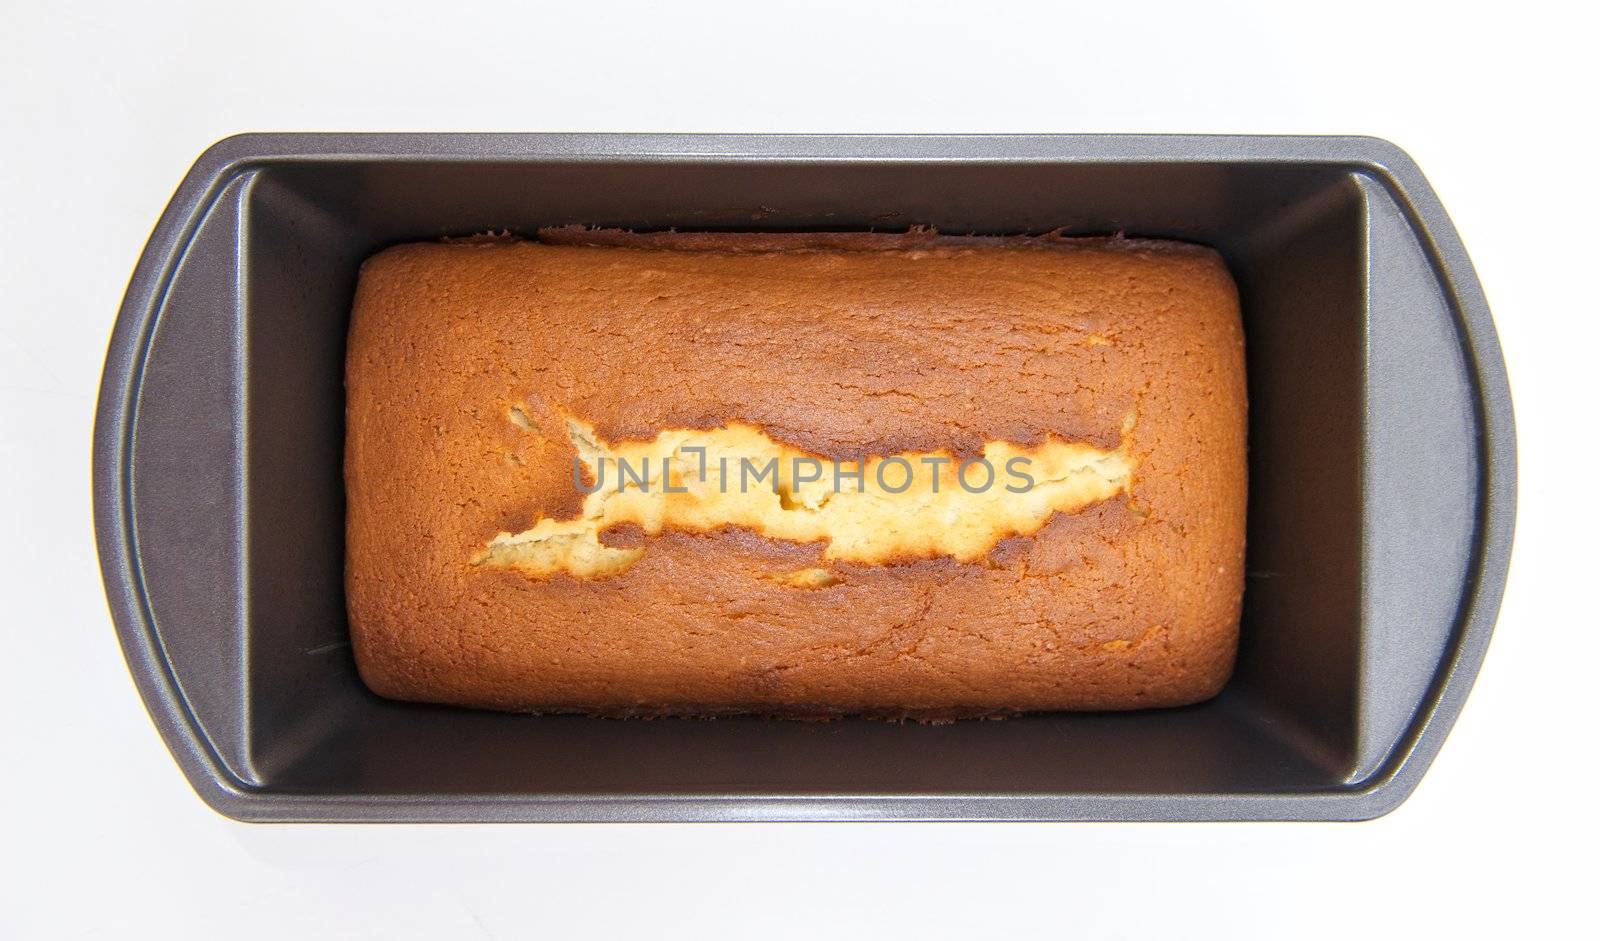 Homemade pound cake baked in an old fashioned bread tray or mold with a crisp dark crust and a split down the middle